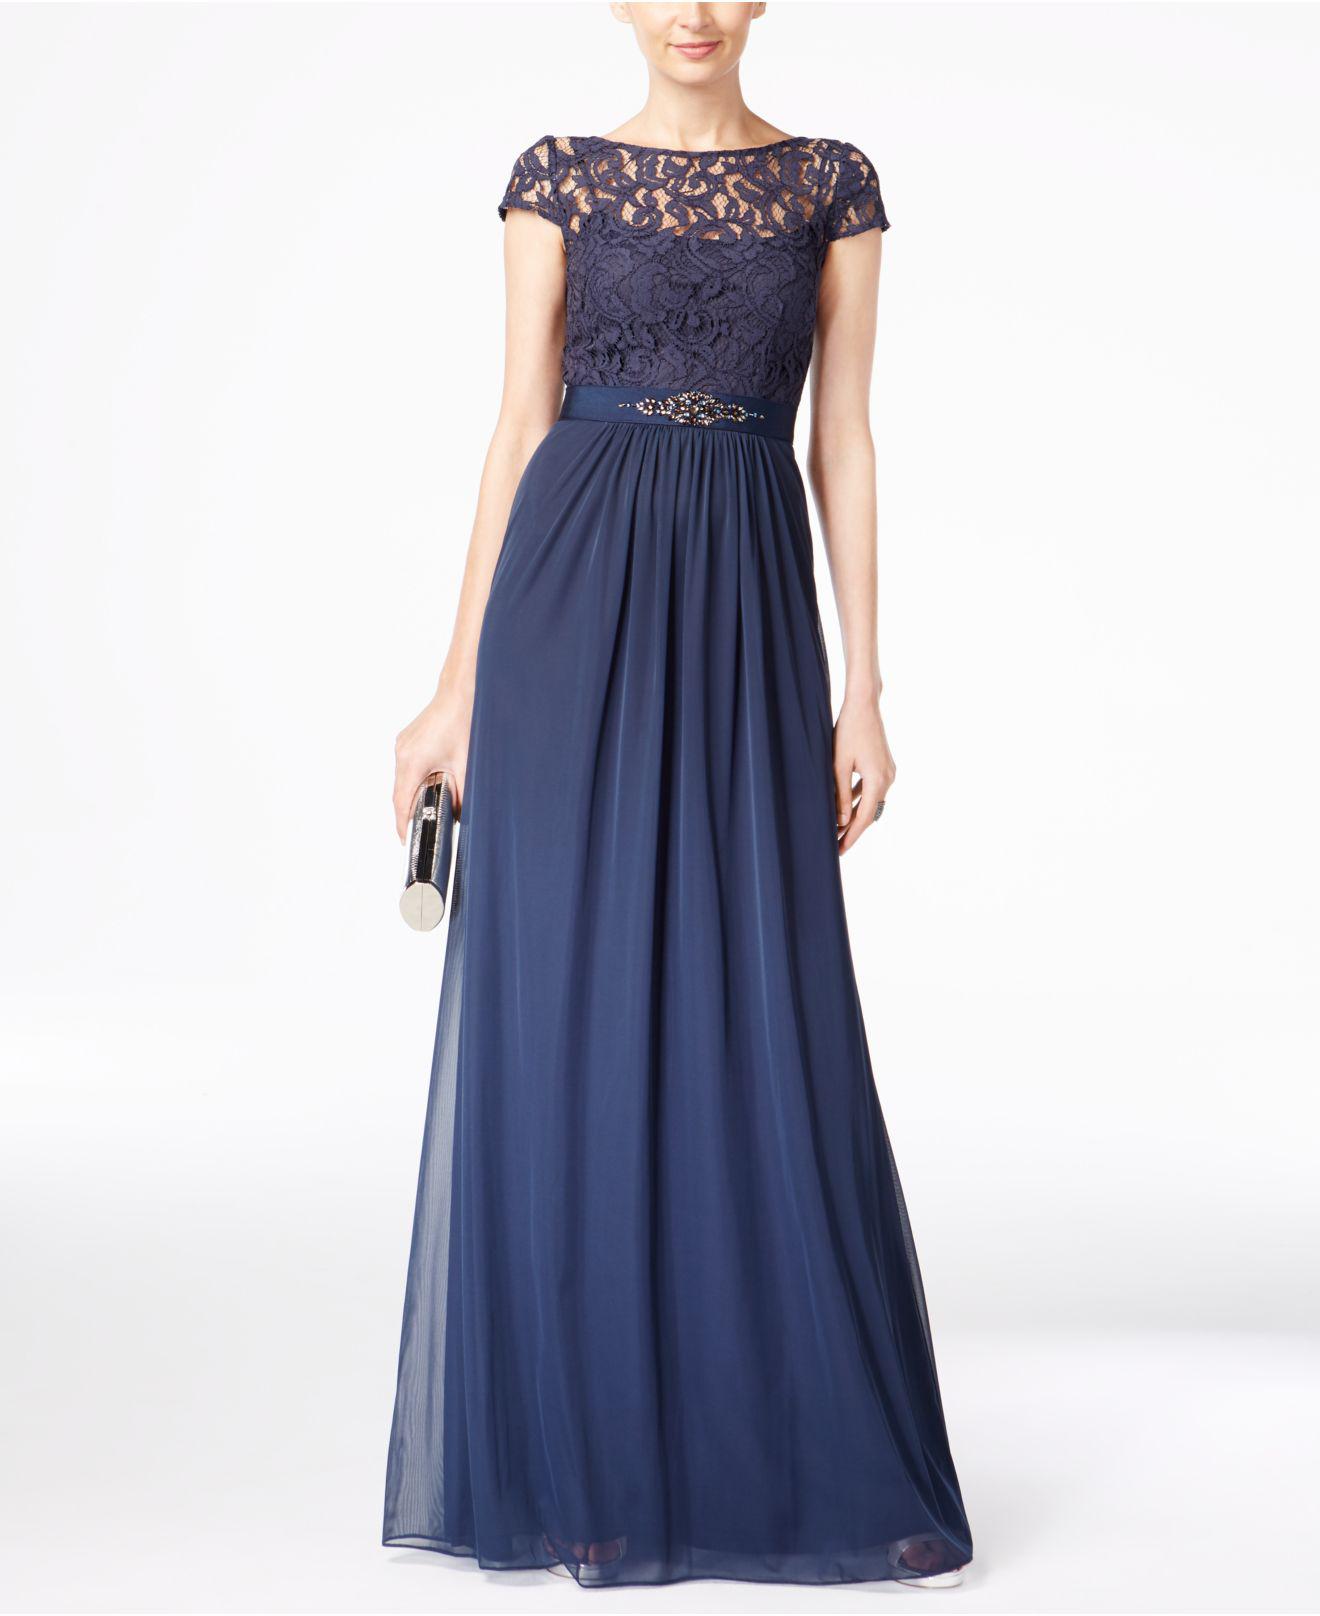 Lyst - Adrianna Papell Cap-sleeve Lace Gown in Blue